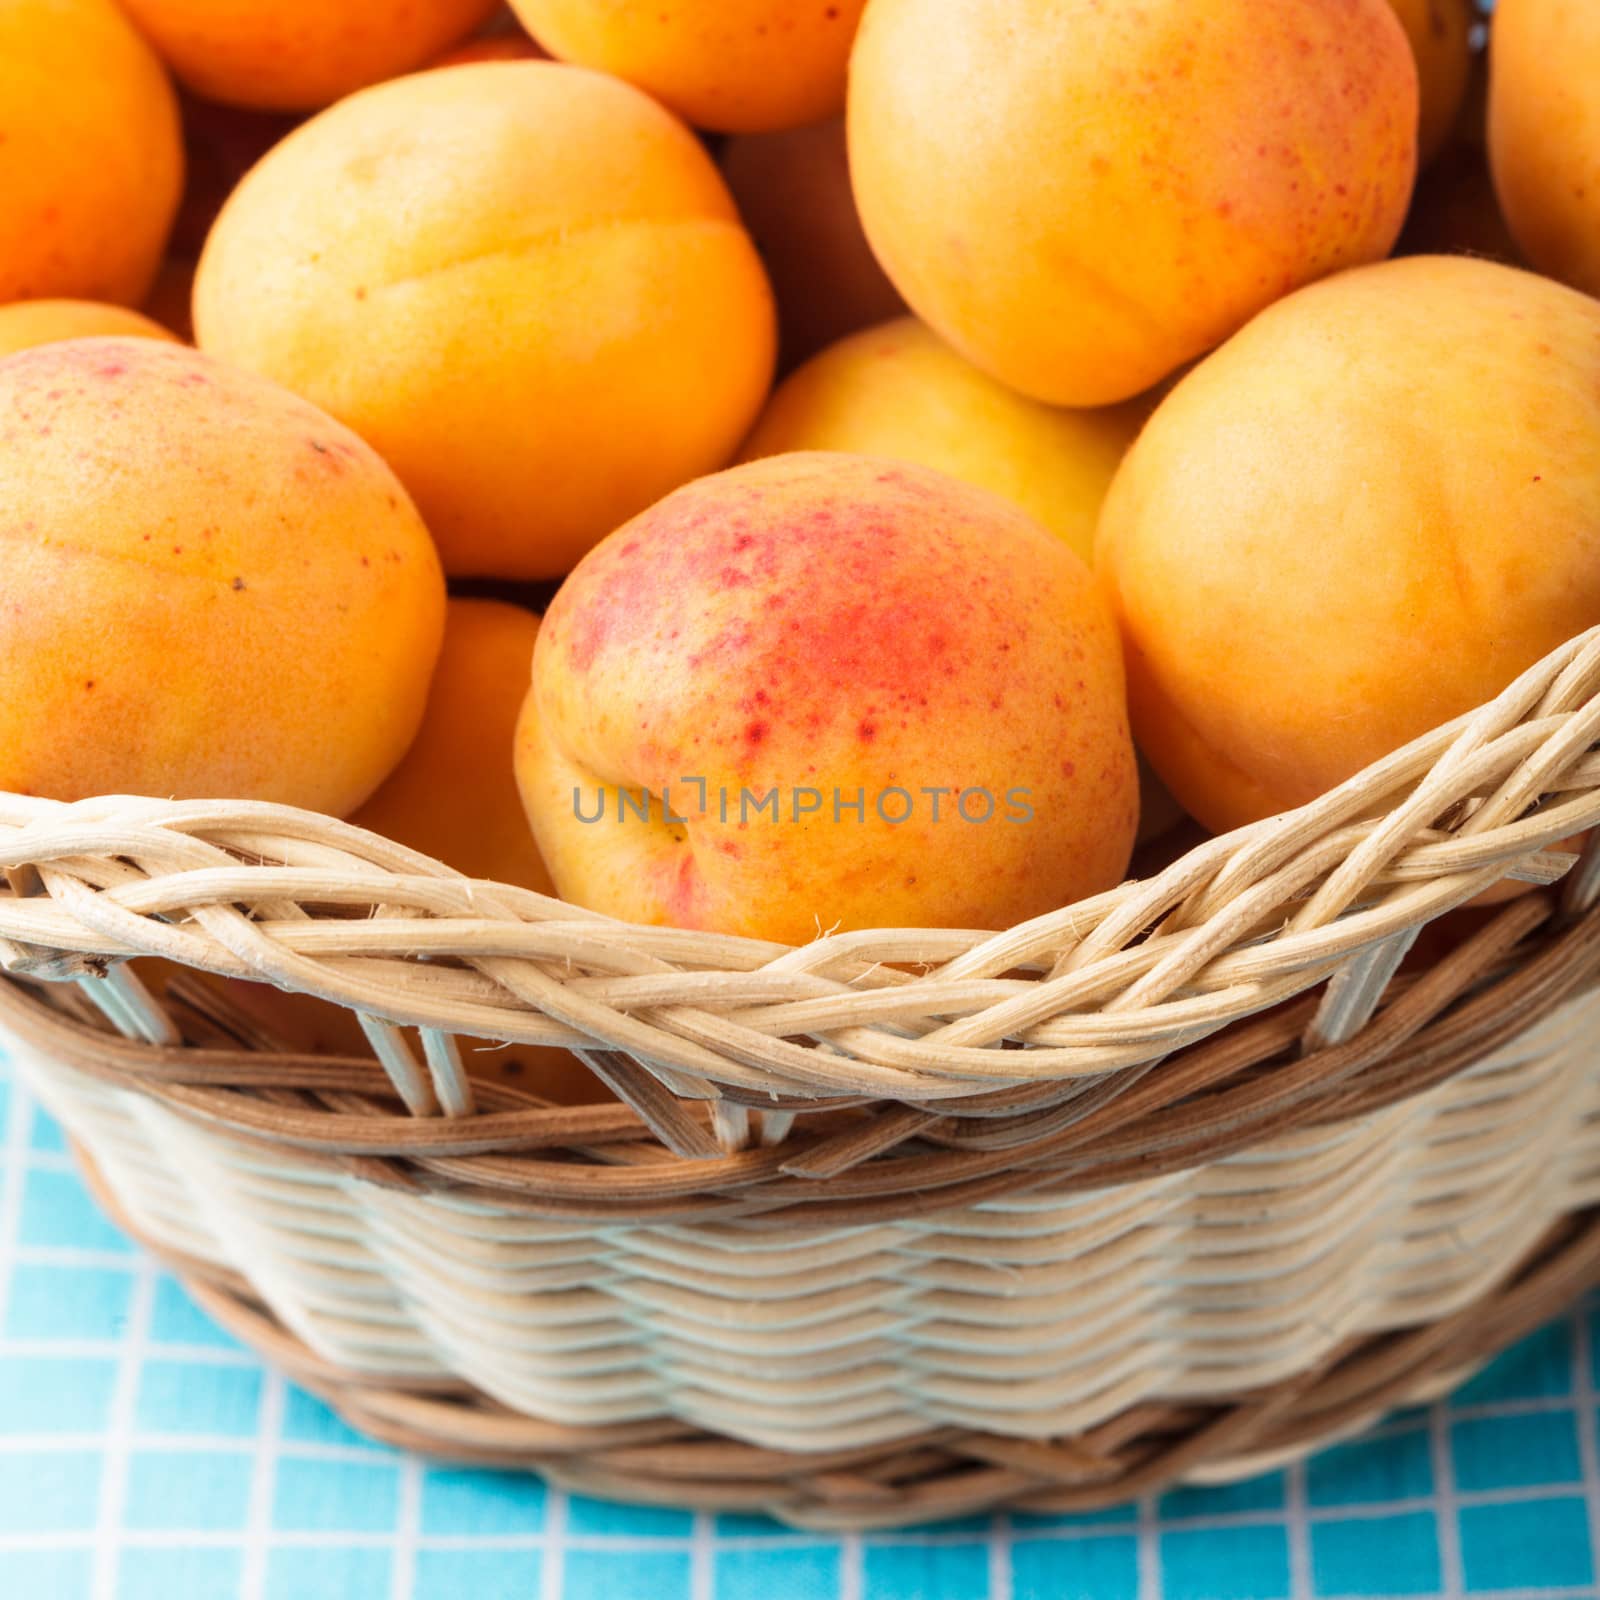 Apricots in a basket on the table